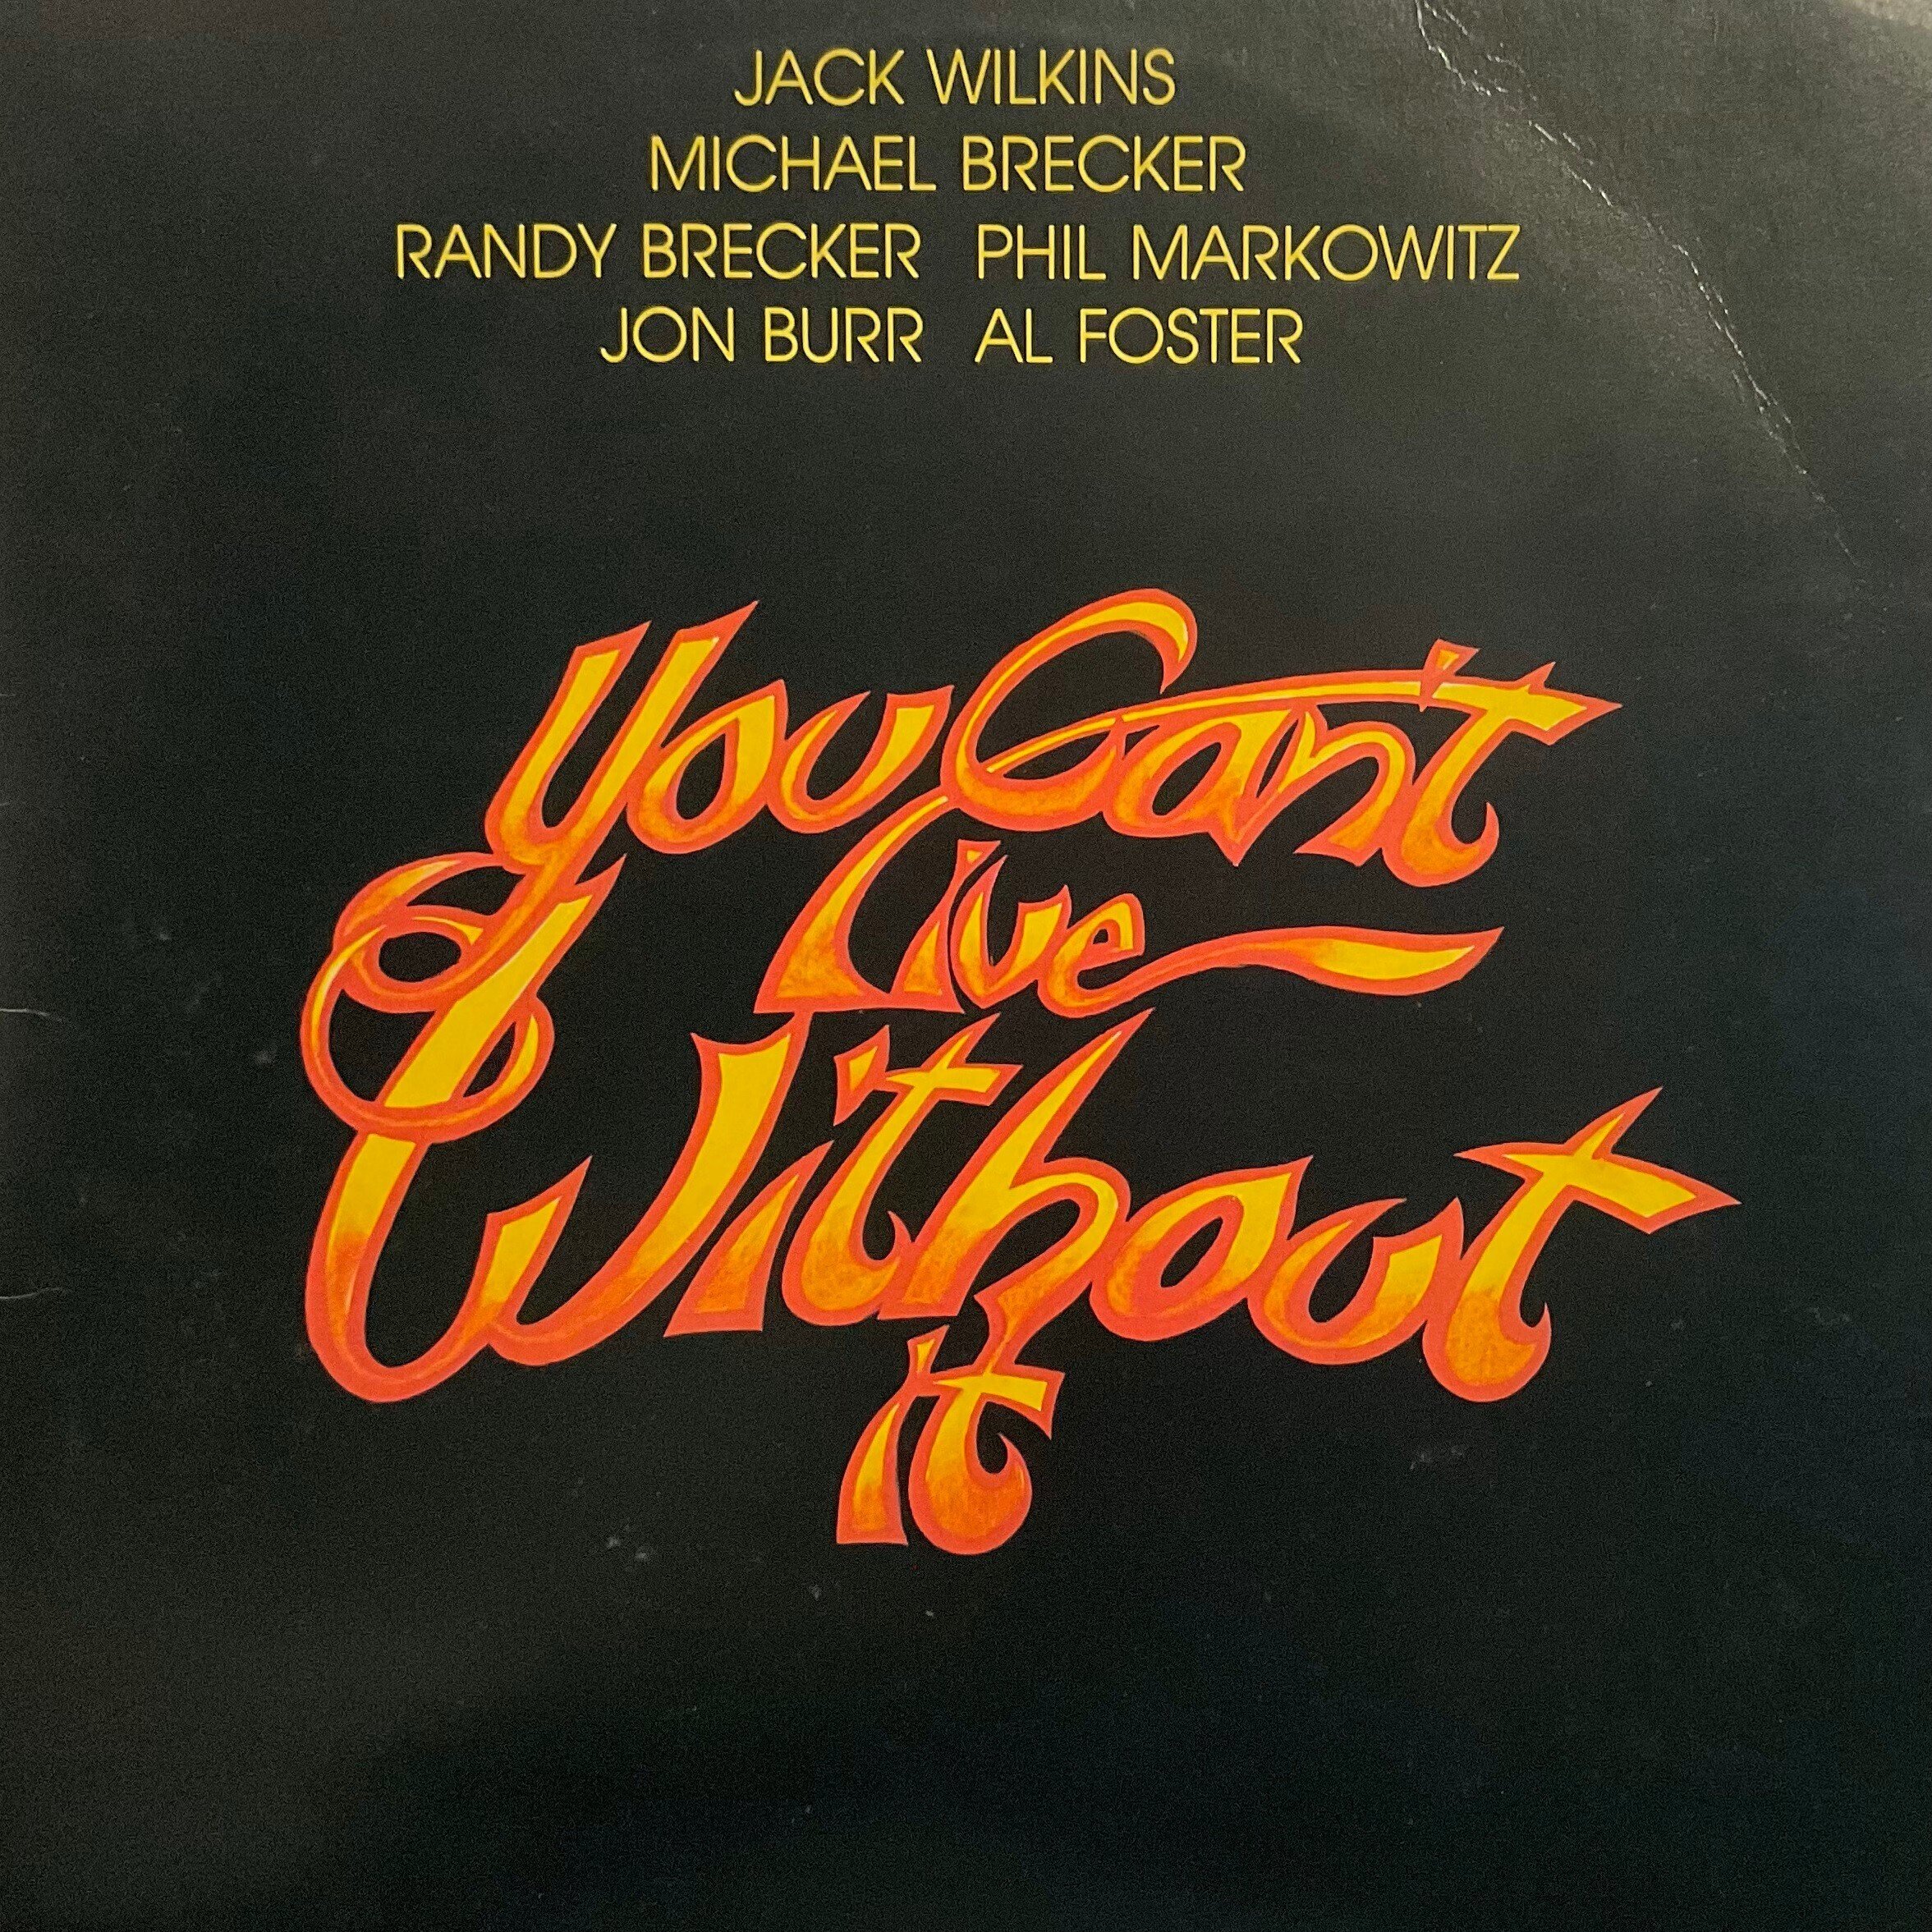 Michael Breckerの名盤 (2) You Can't Live Without it/Jack Wilkins 